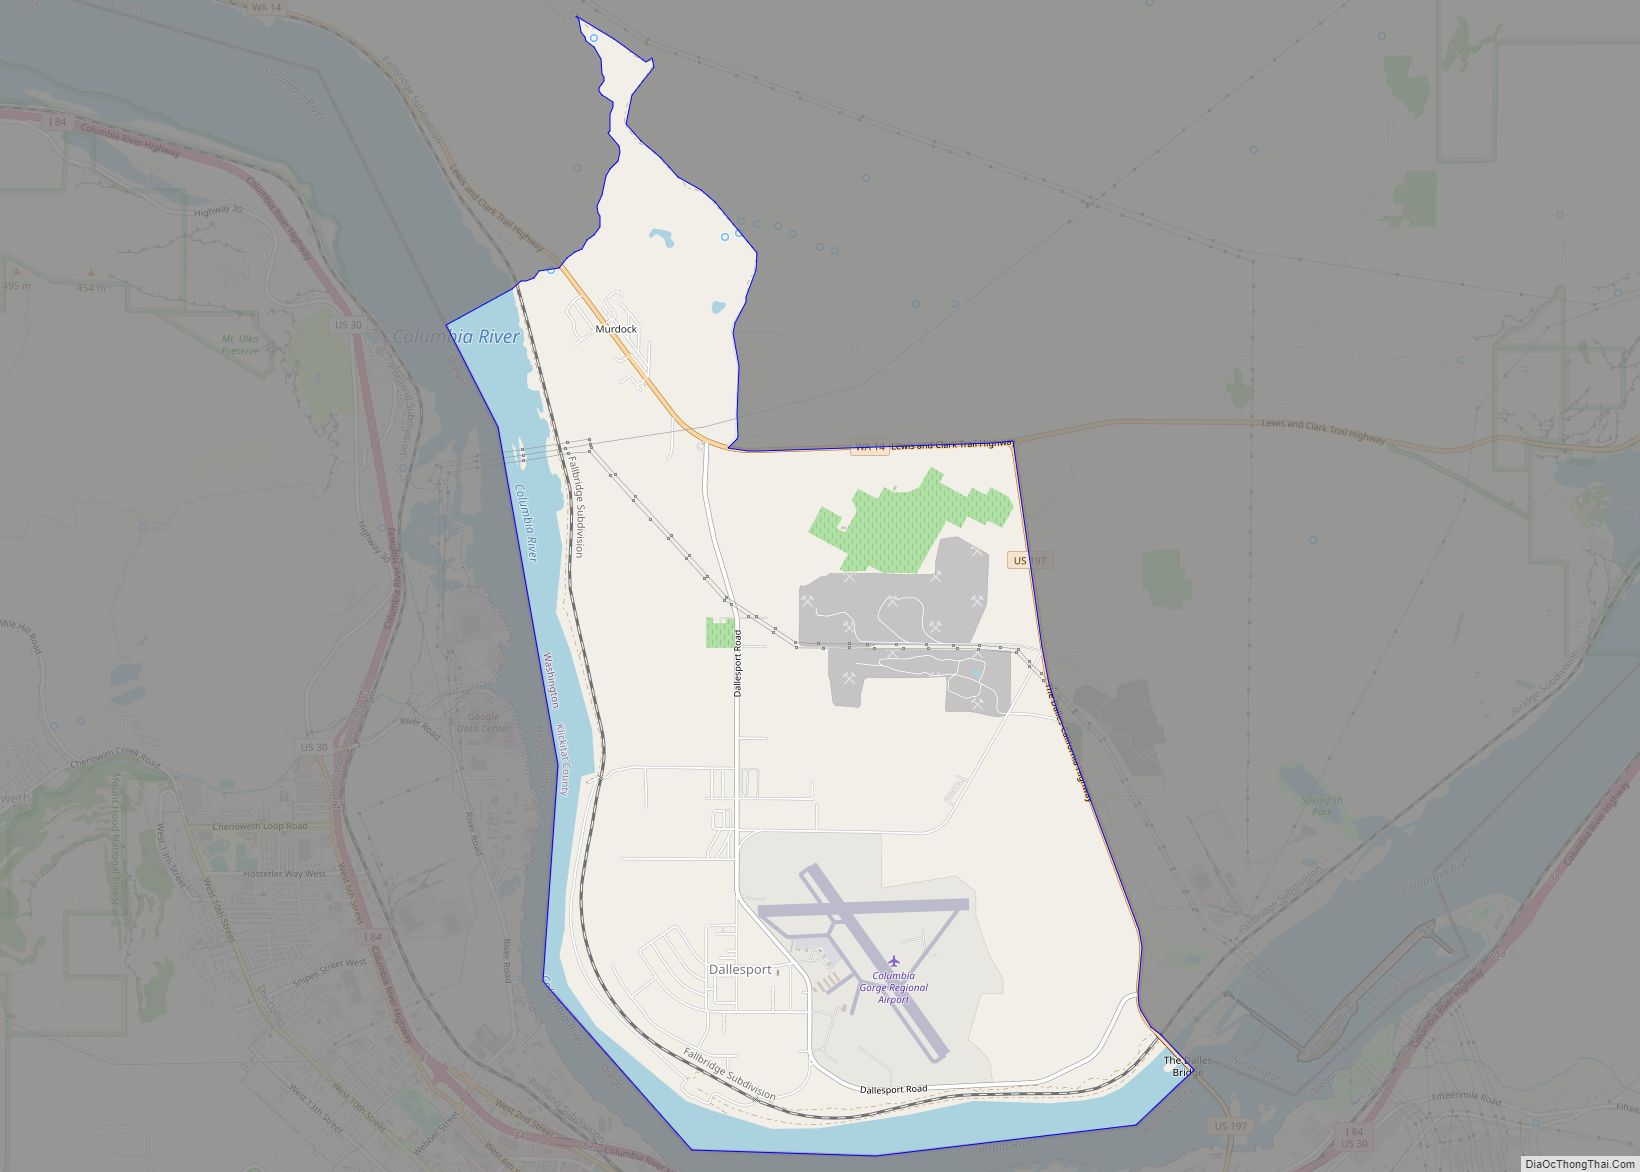 Map of Dallesport CDP